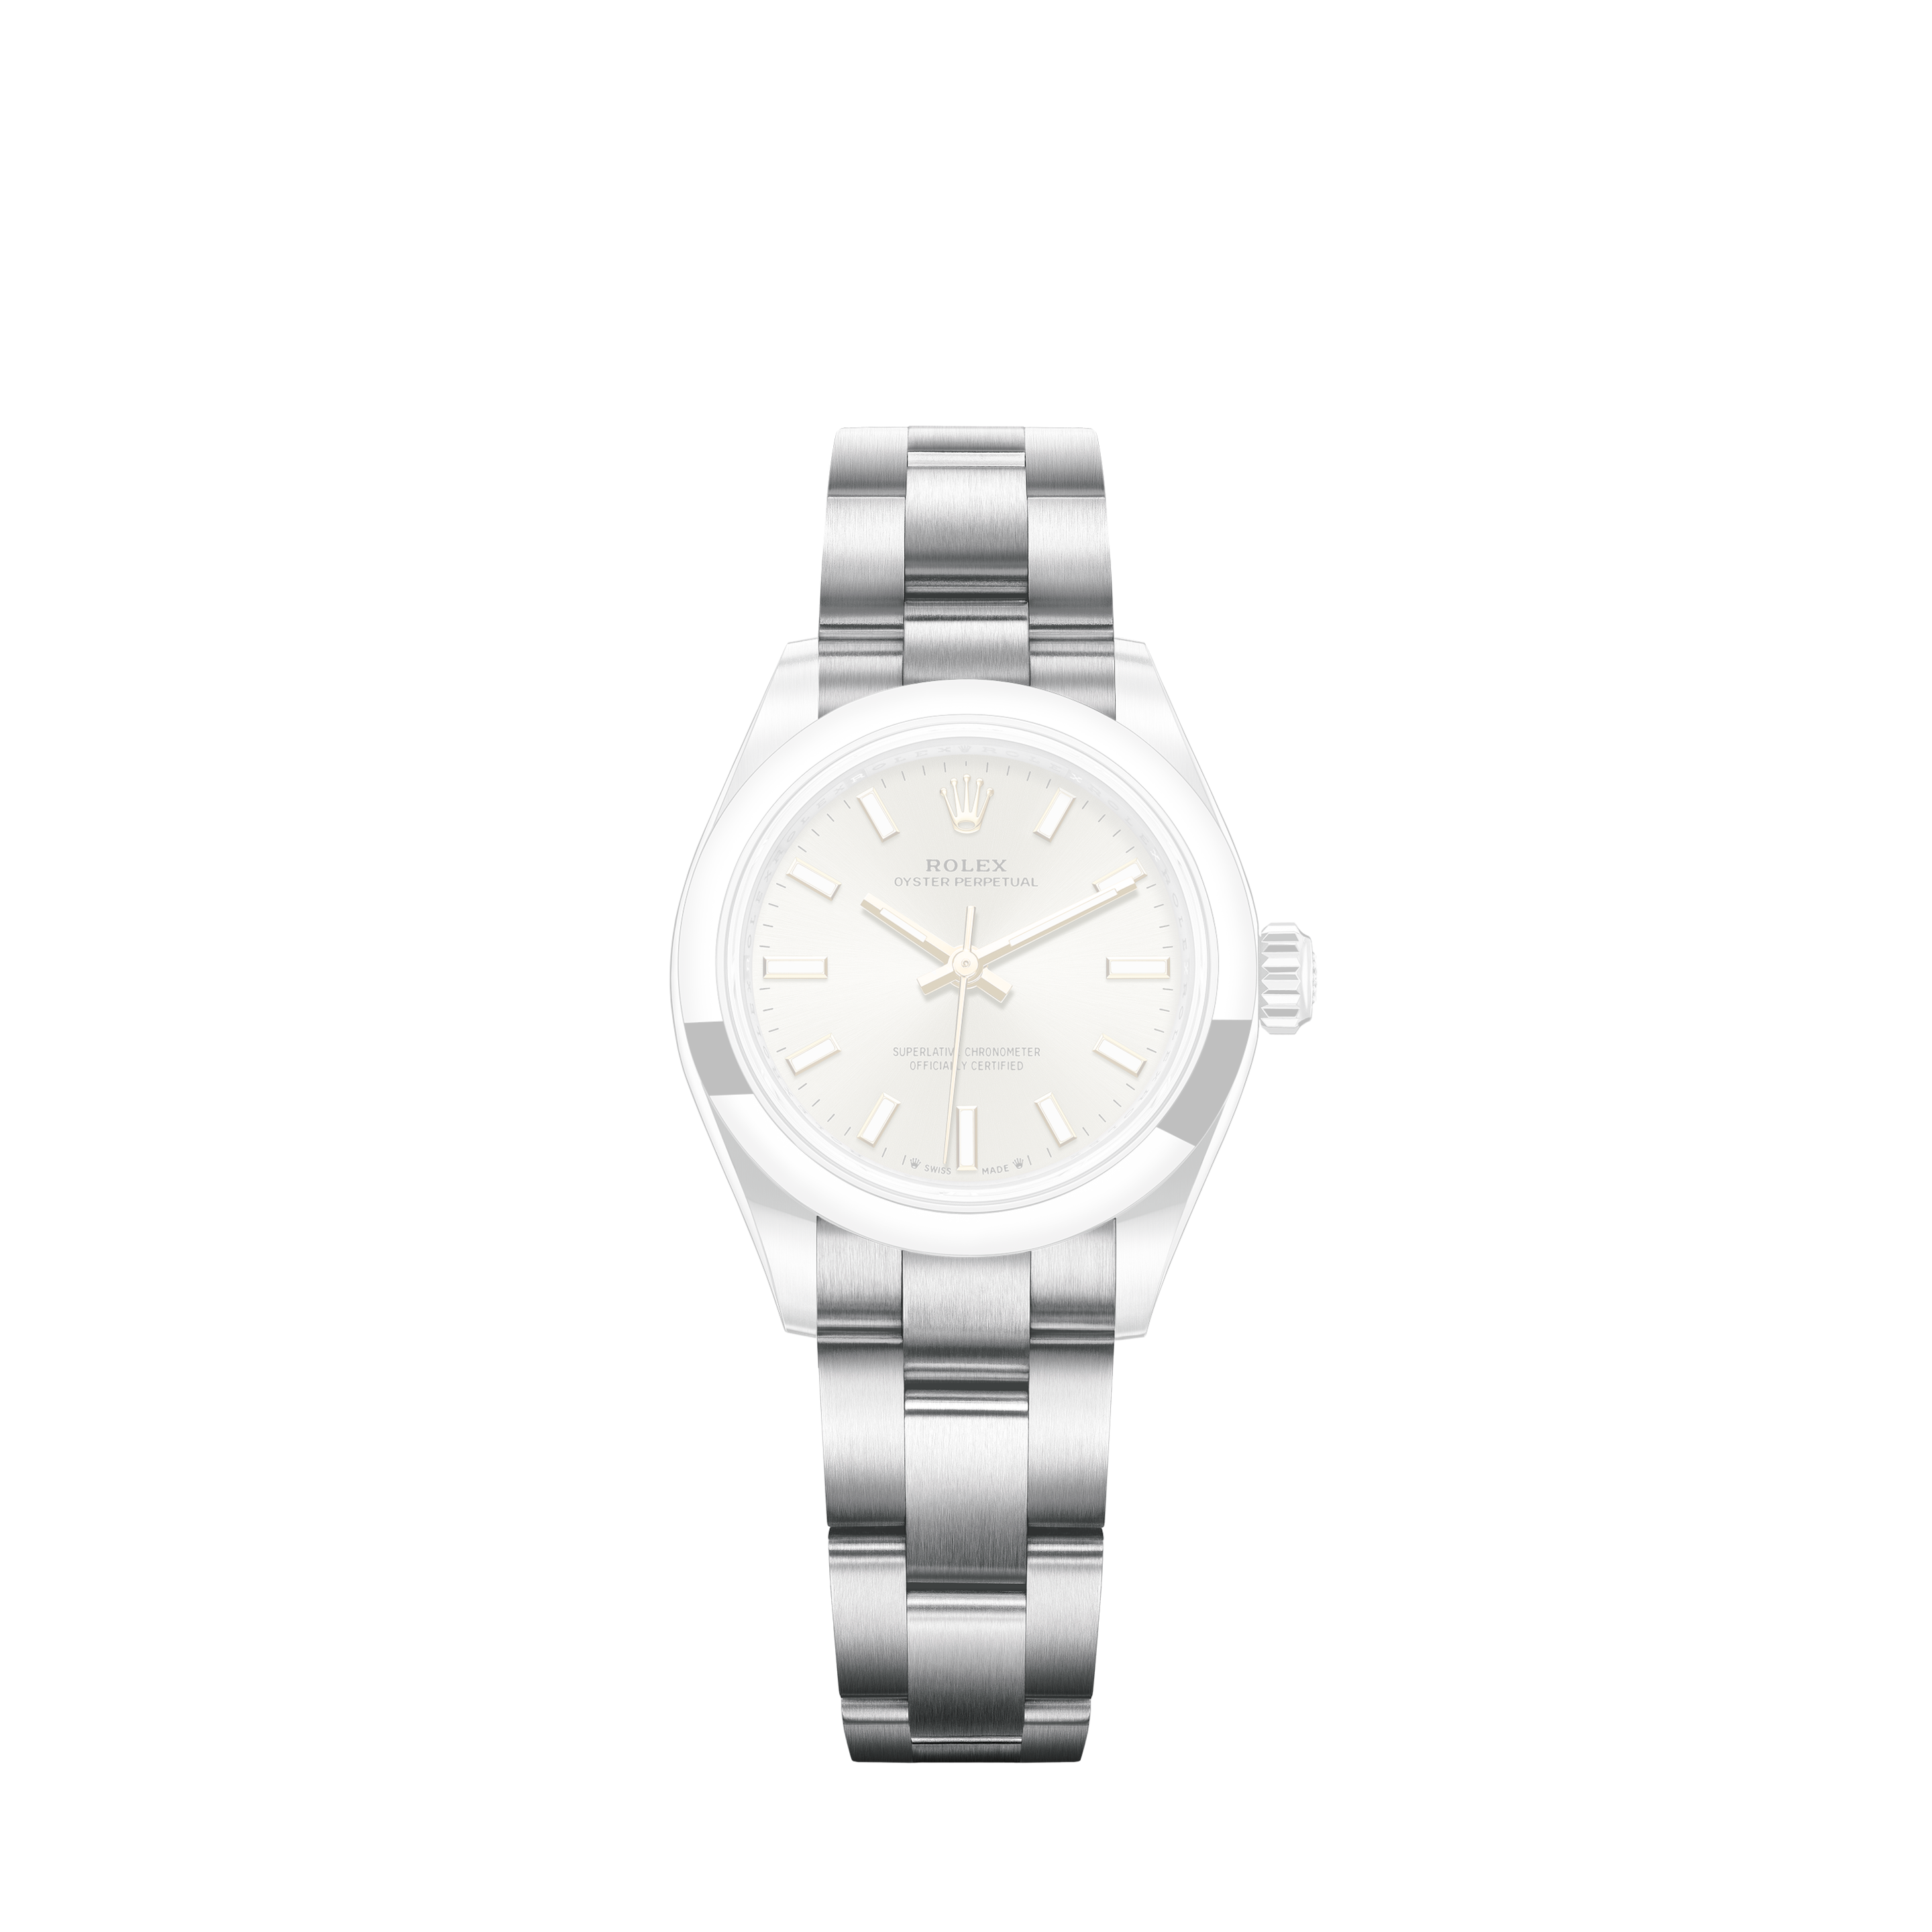 Rolex Datejust 41 41 mm Stainless Steel and 18k White Gold 126334-0015 Mens WatchRolex Datejust 41 41 mm Stainless Steel and 18k Yellow Gold 126303-0006 Mens Watch